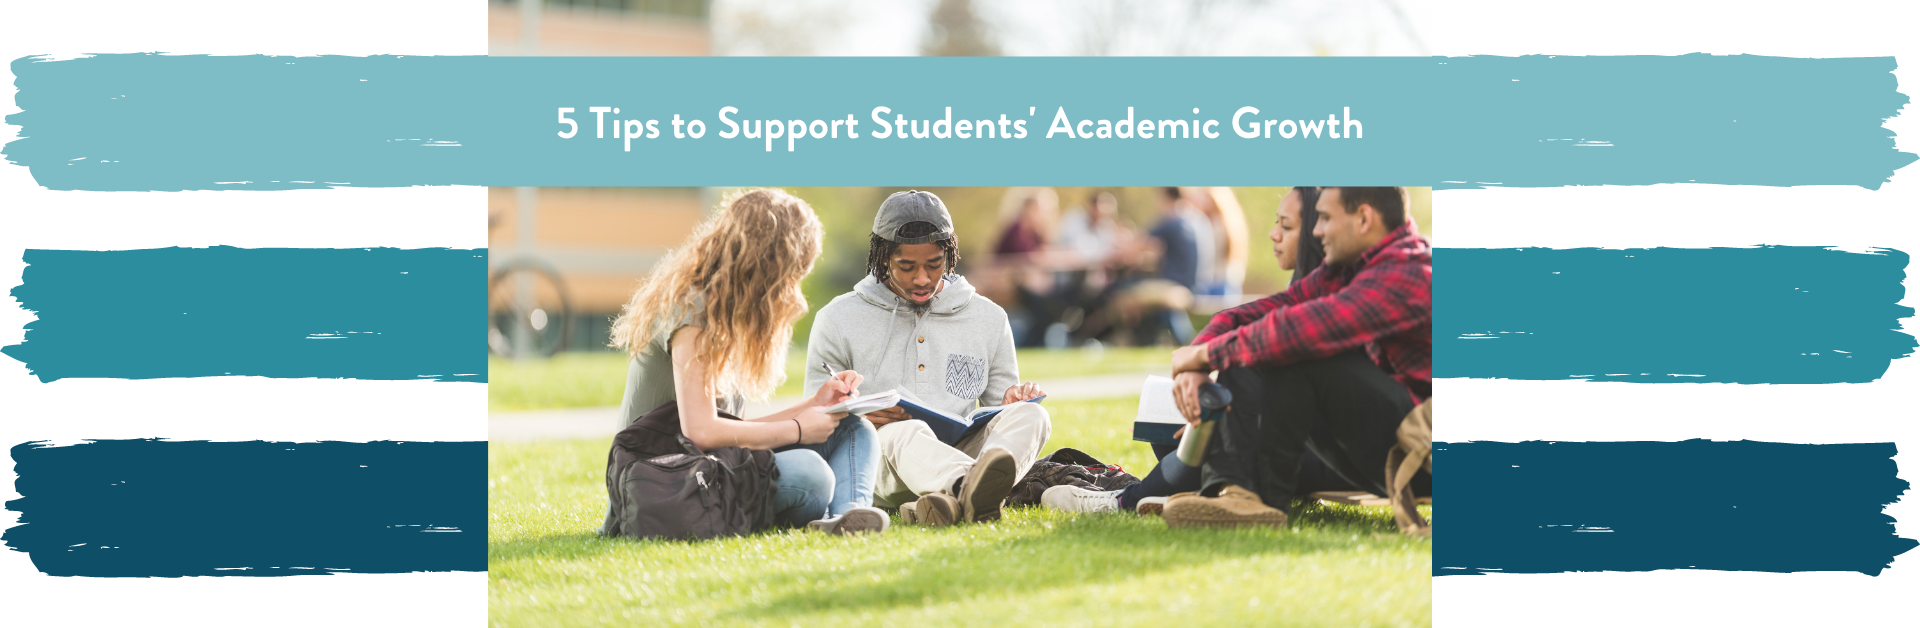 group of four students studying outdoors with title "5 Tips to Support Students' Academic Growth"